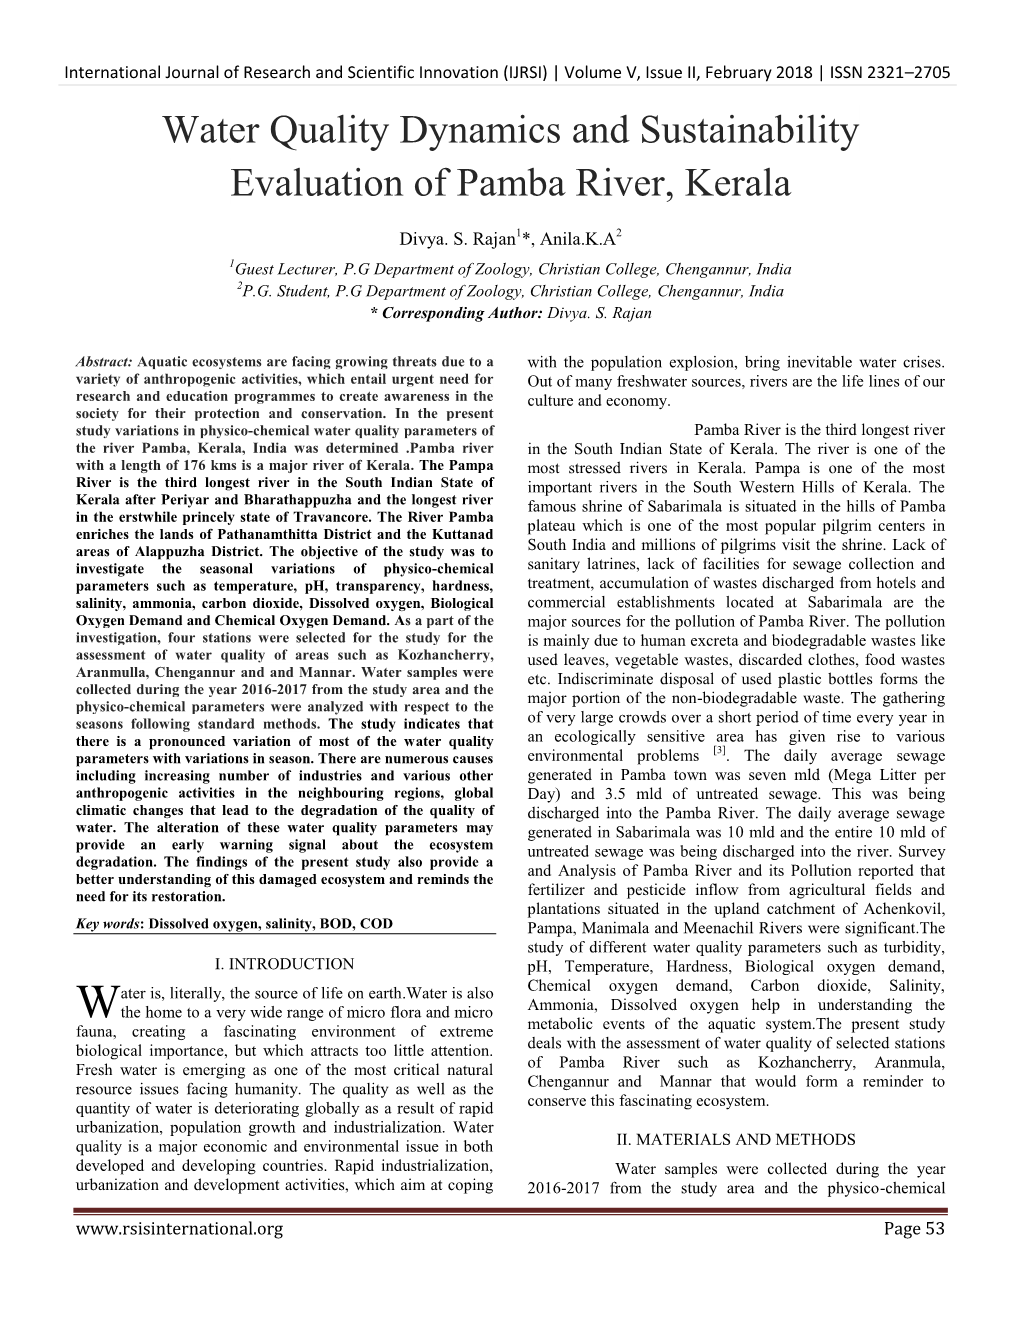 Water Quality Dynamics and Sustainability Evaluation of Pamba River, Kerala